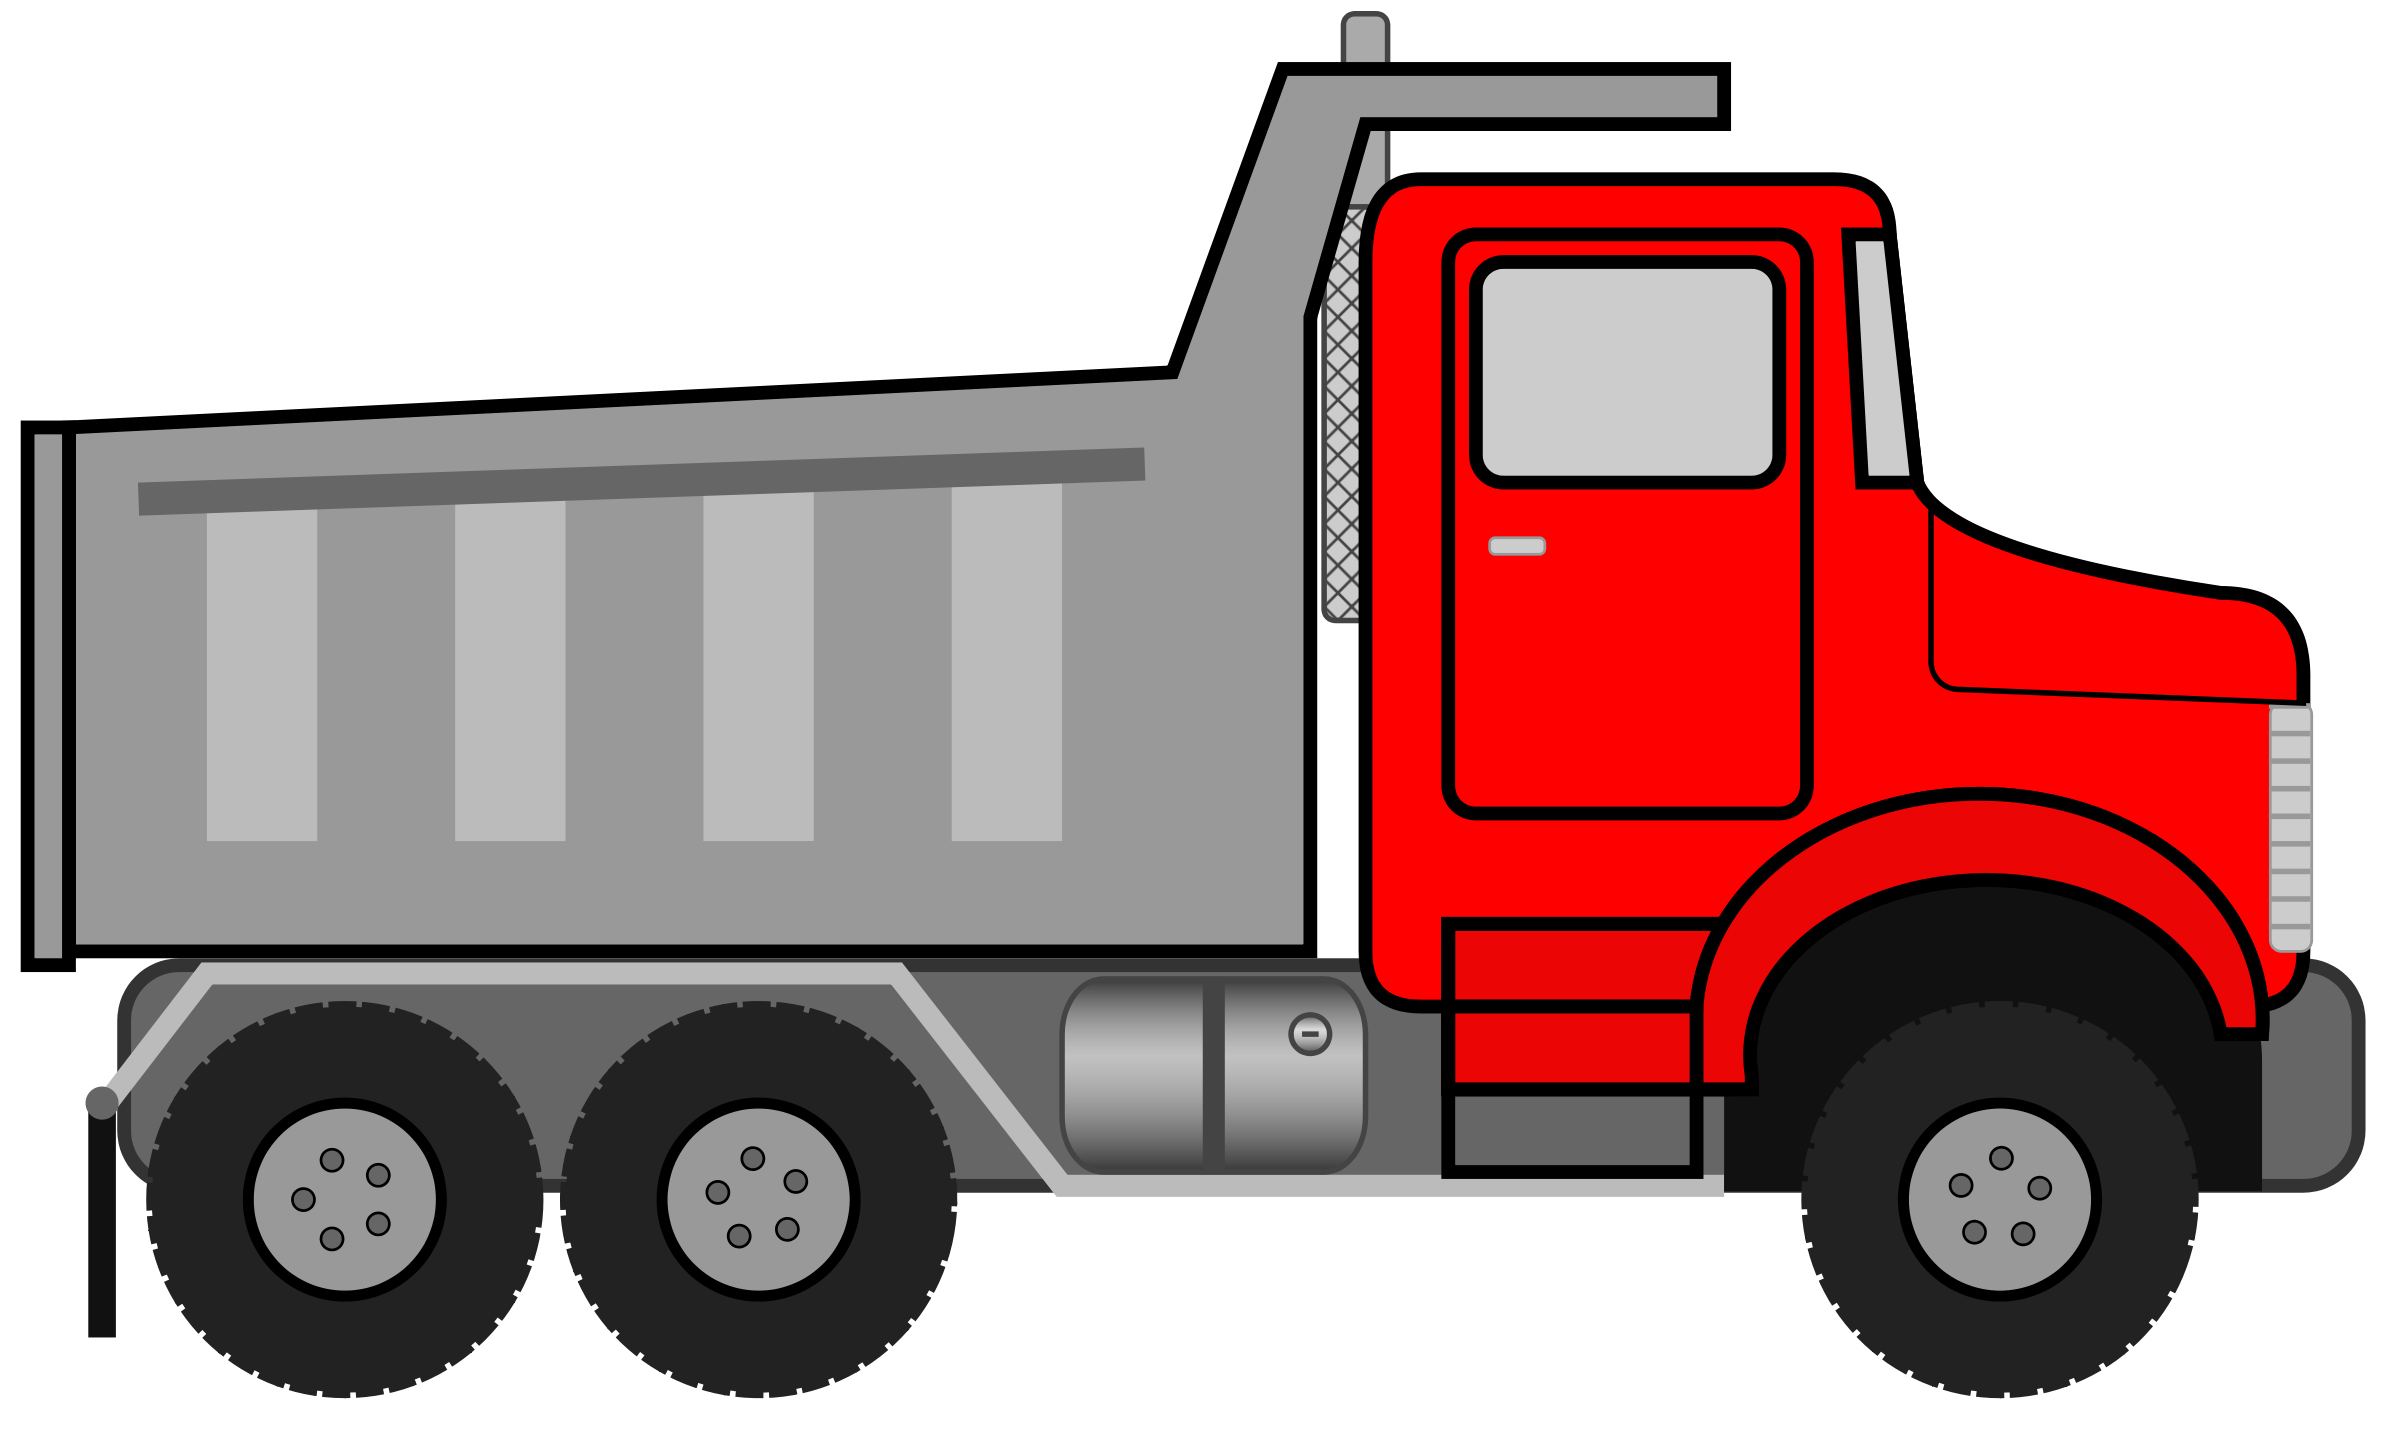 Pickup truck truck clipart free clipart images clipartix